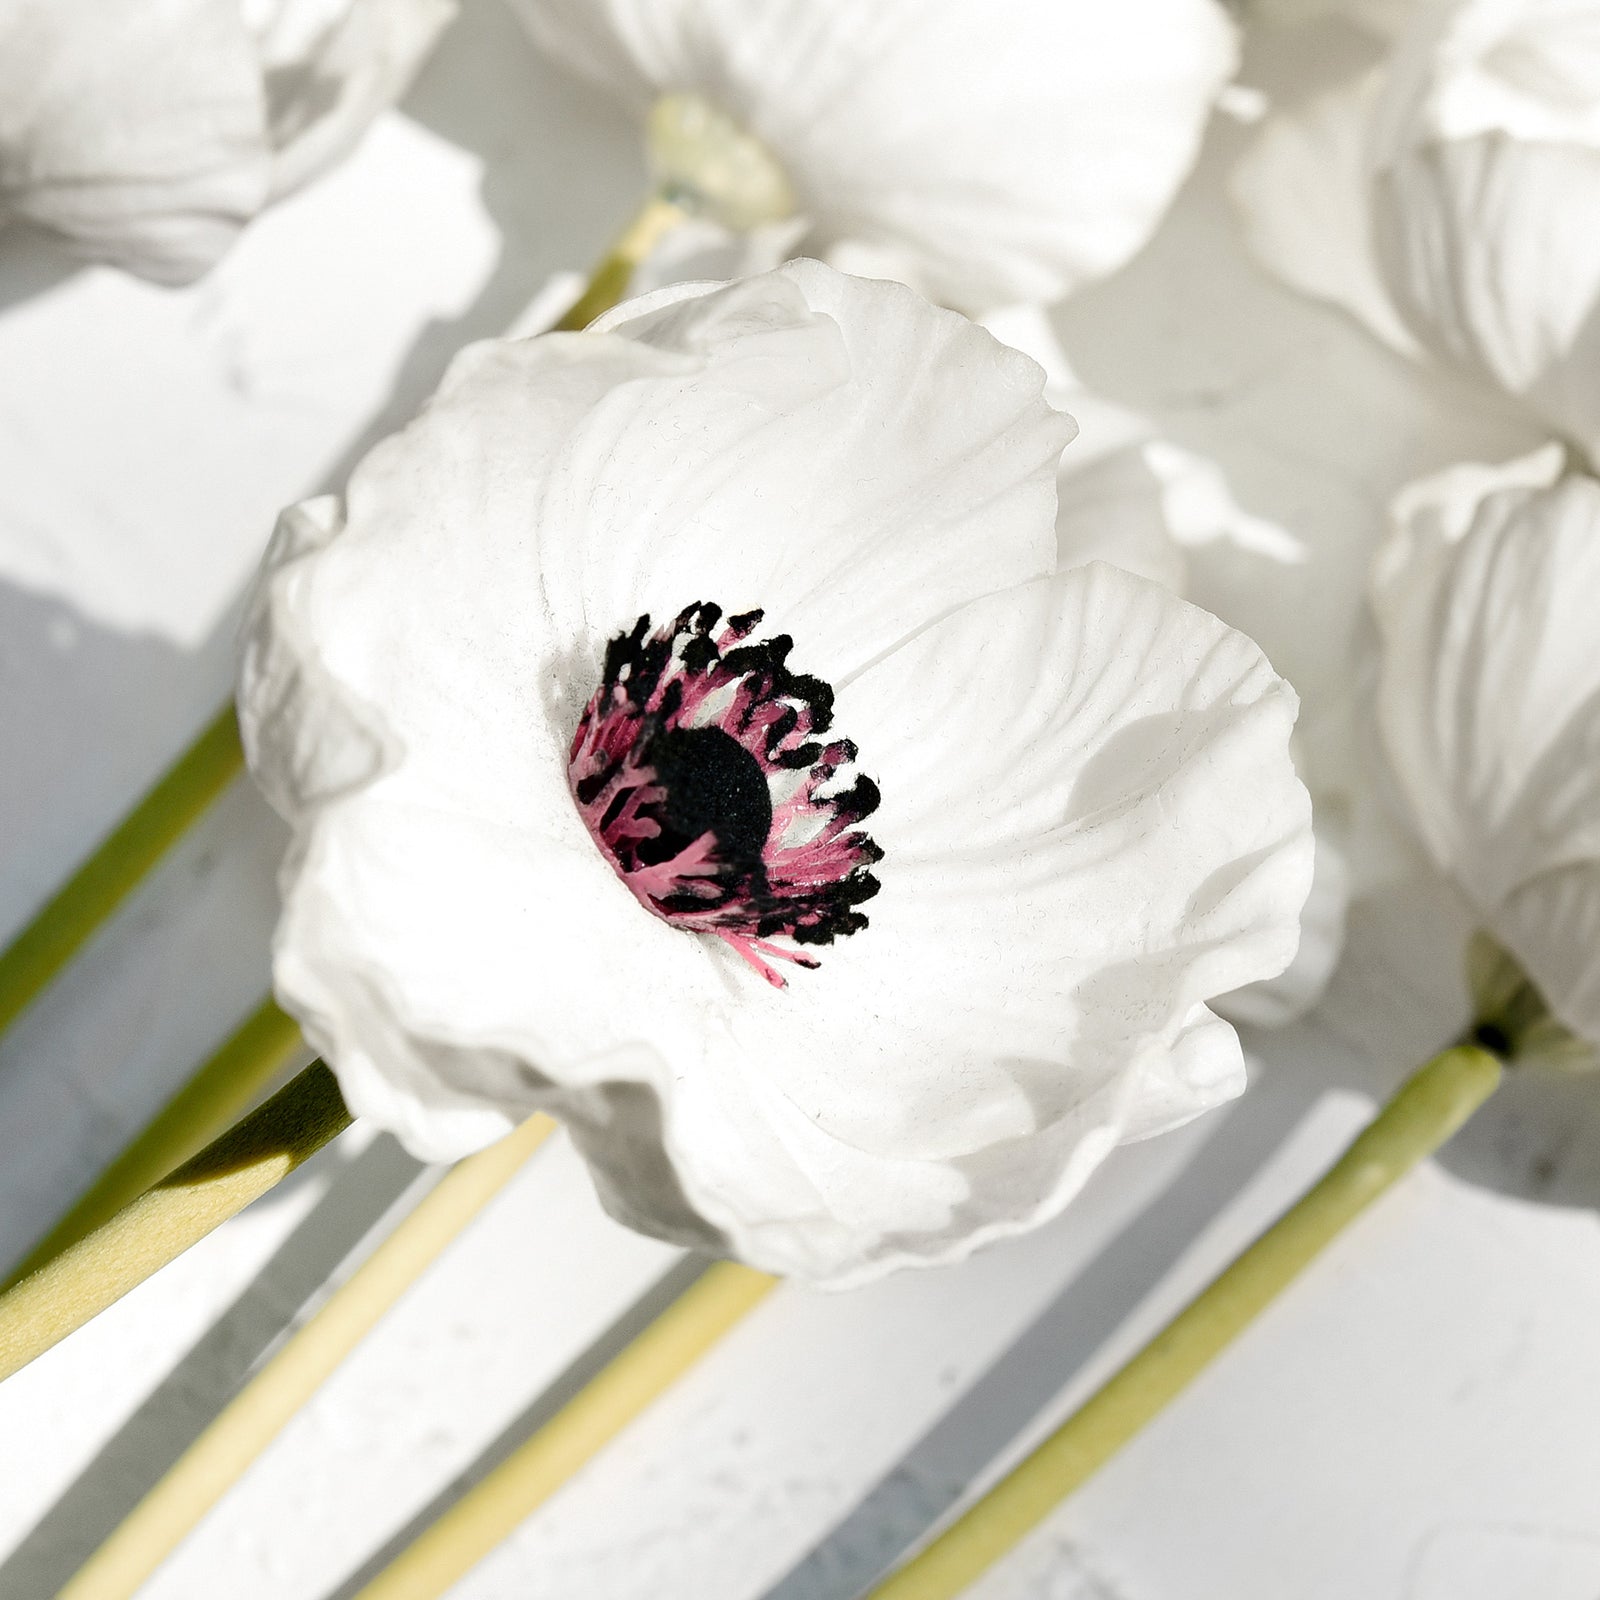 FiveSeasonStuff White Real Touch Artificial Poppy Flowers Remembrance Day Decorations 10 Stems 12.6'' (32cm)